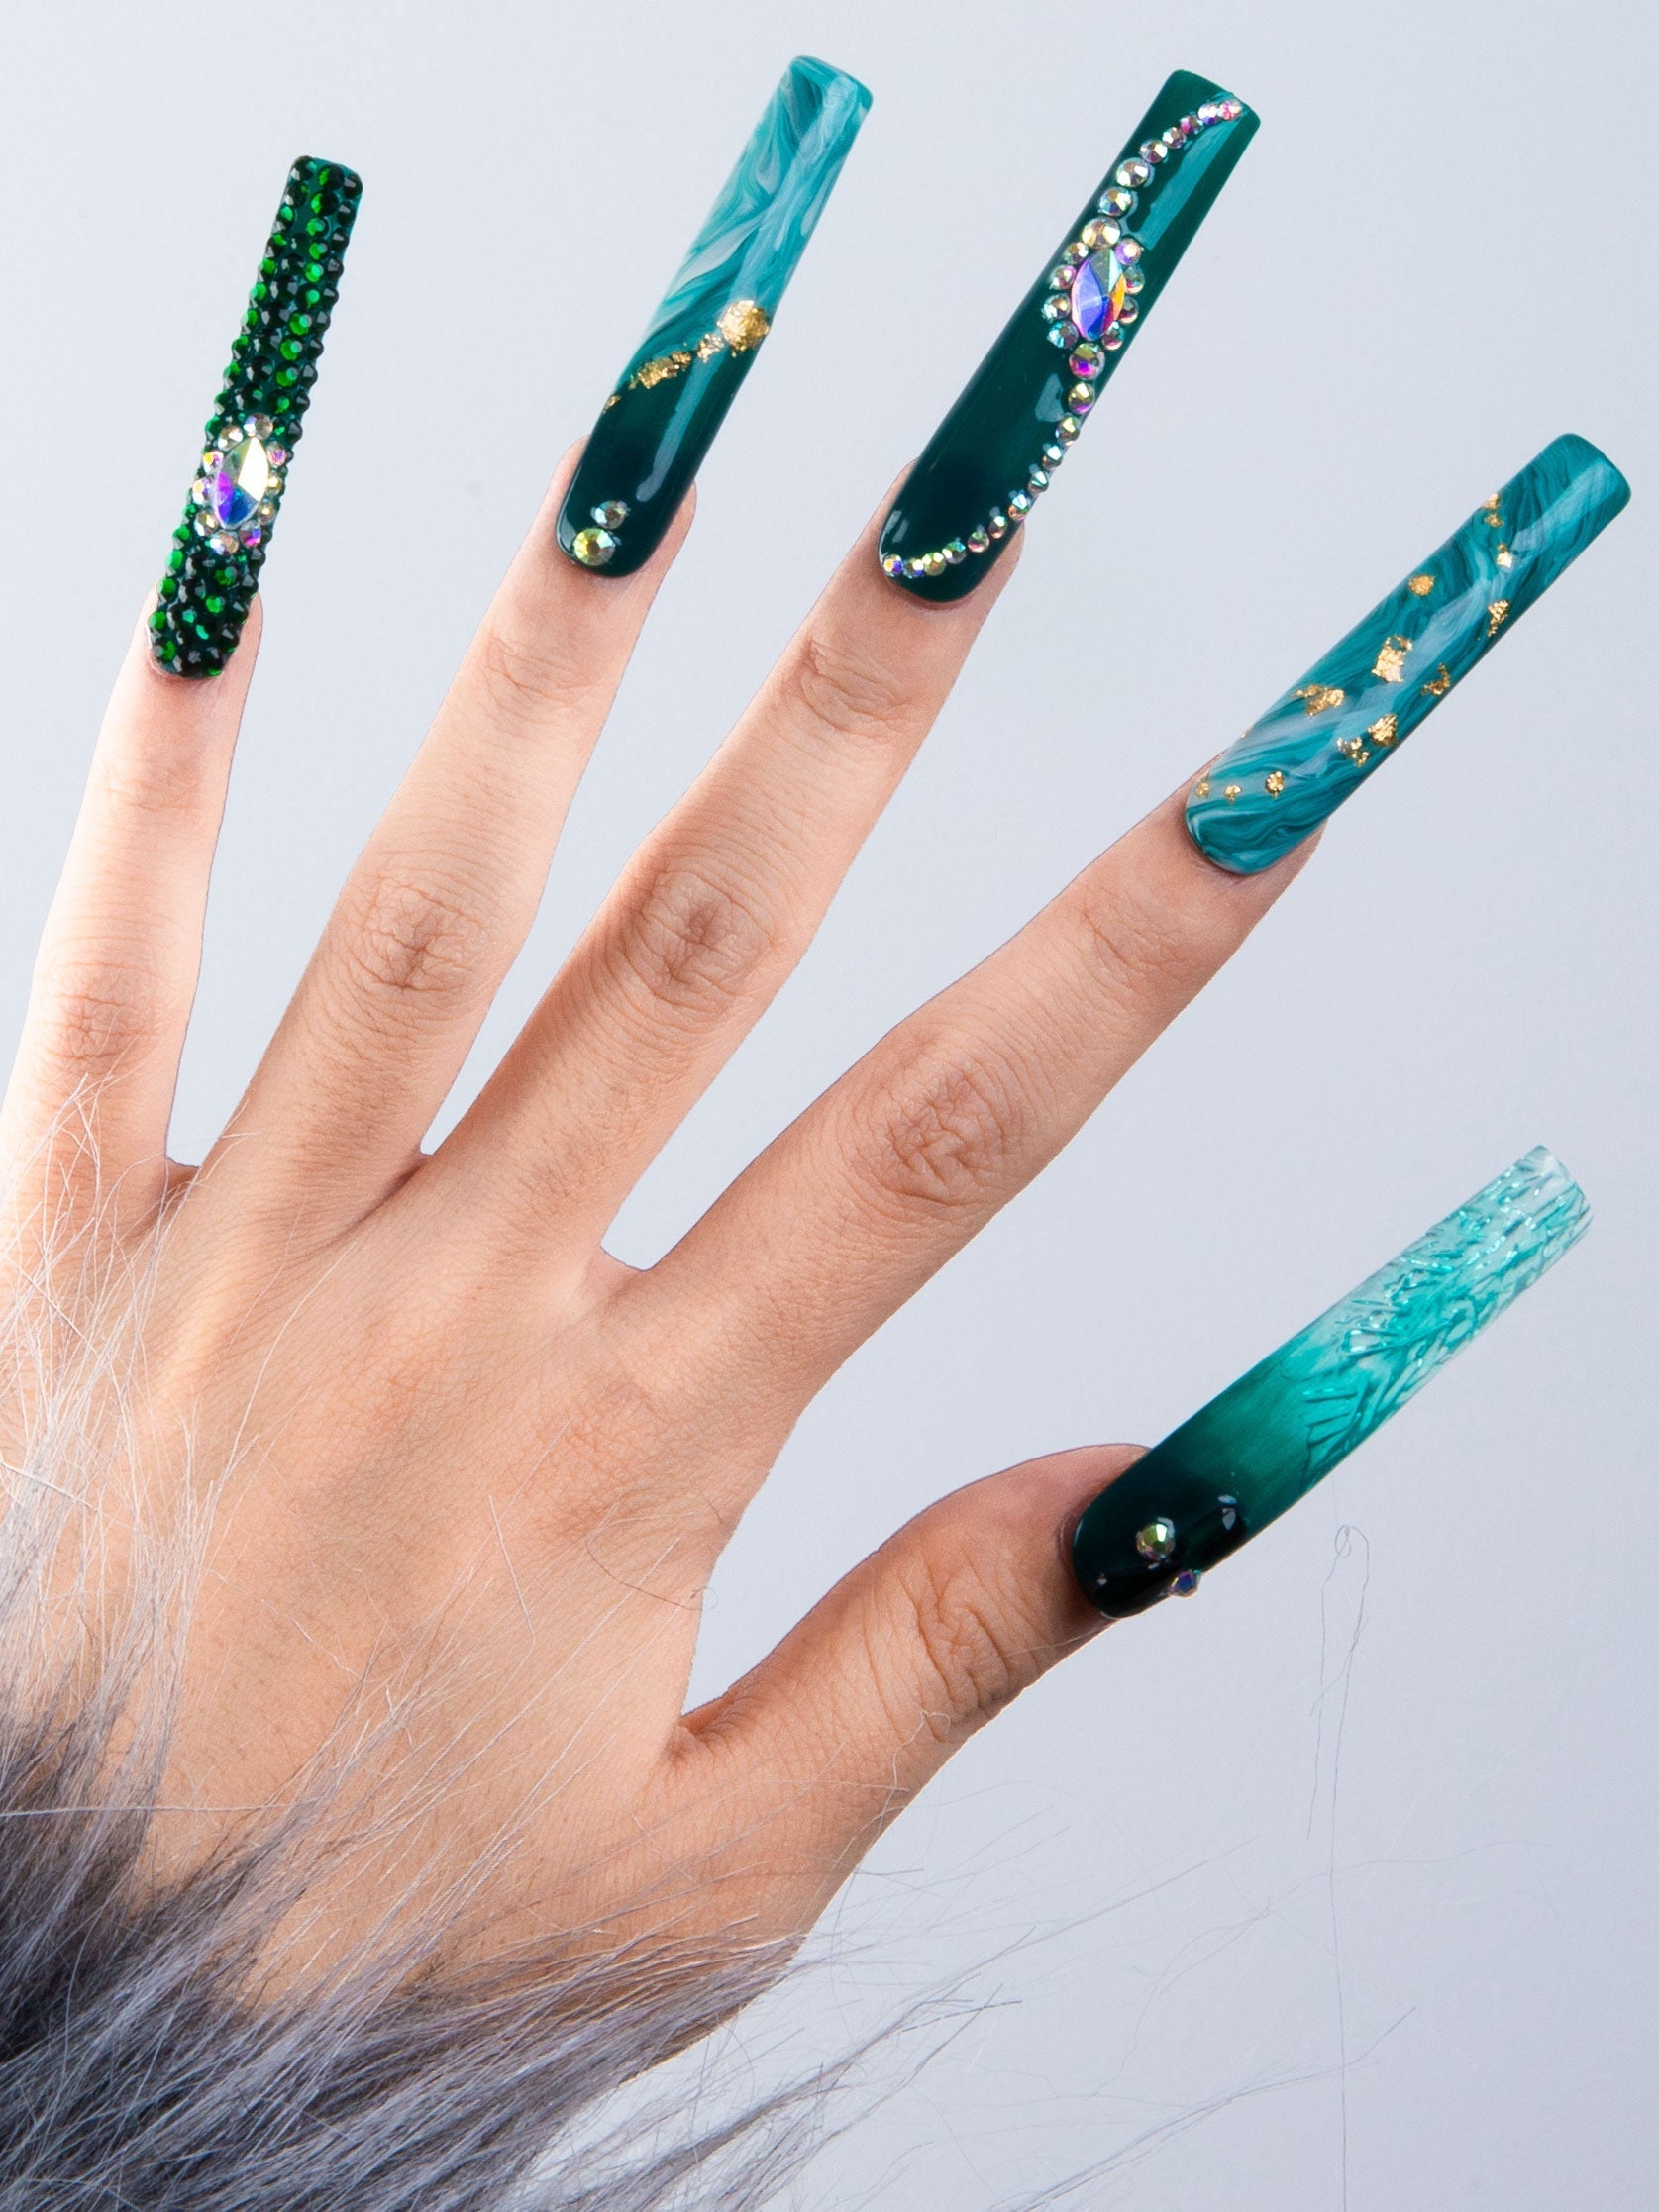 Hand showcasing Lovful's Emerald Envy press-on nails, featuring long acrylic nails with intricate gold and gem-like designs in green hues, inspired by forest foliage.